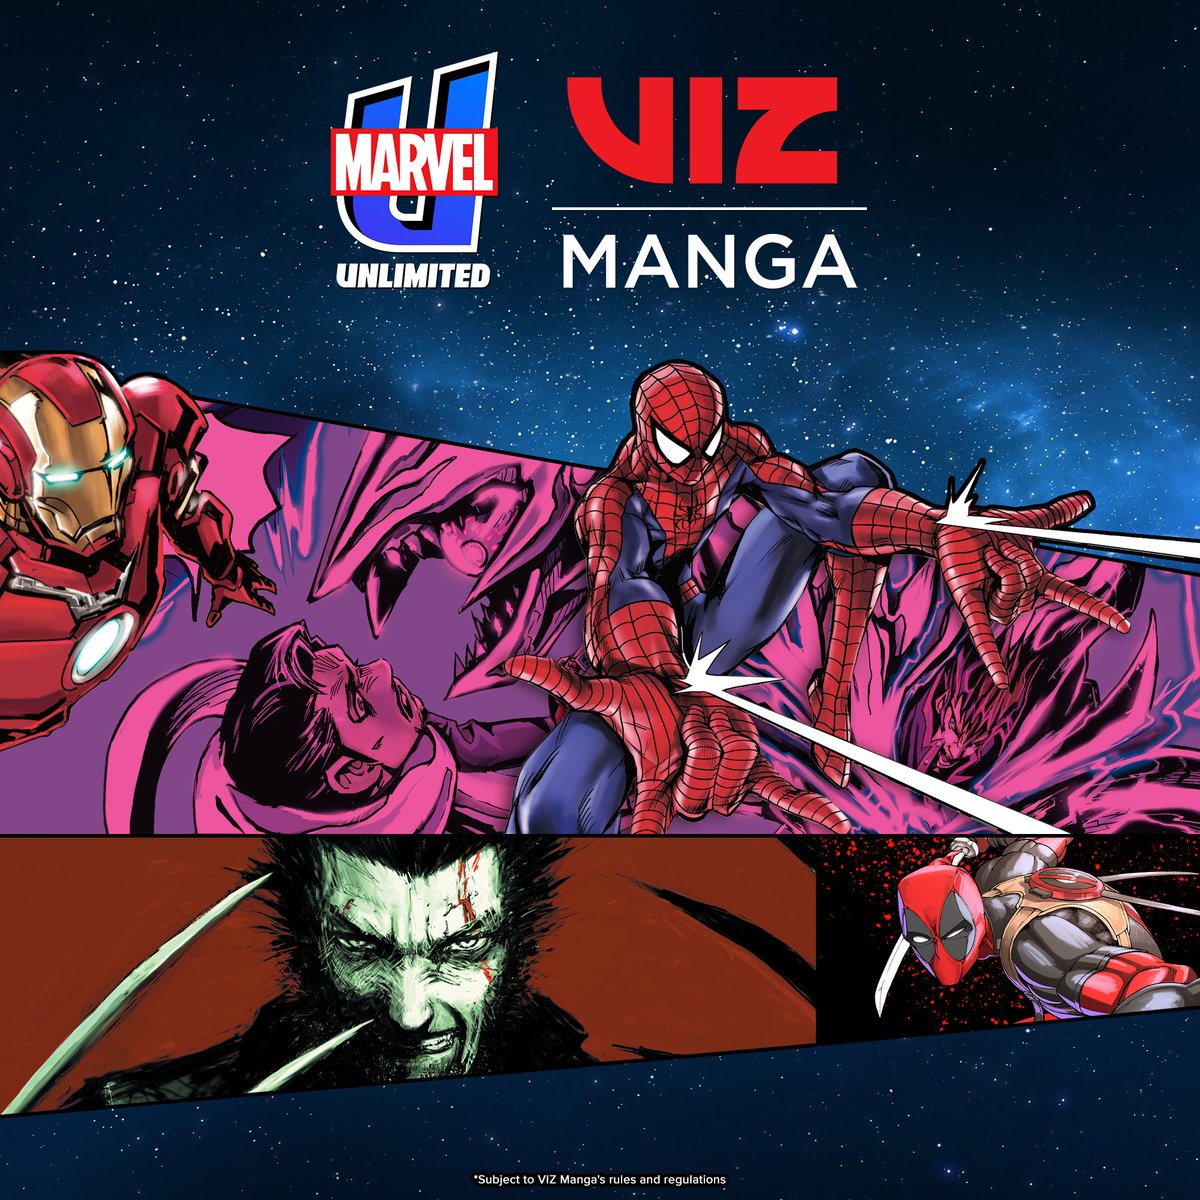 Marvel Unlimited fans! Access your favorite Marvel Manga titles with a 1-month gift to @VIZMedia Manga. Read new stories featuring Spider-Man, Deadpool, Wolverine, and more: spr.ly/6010wAvZM